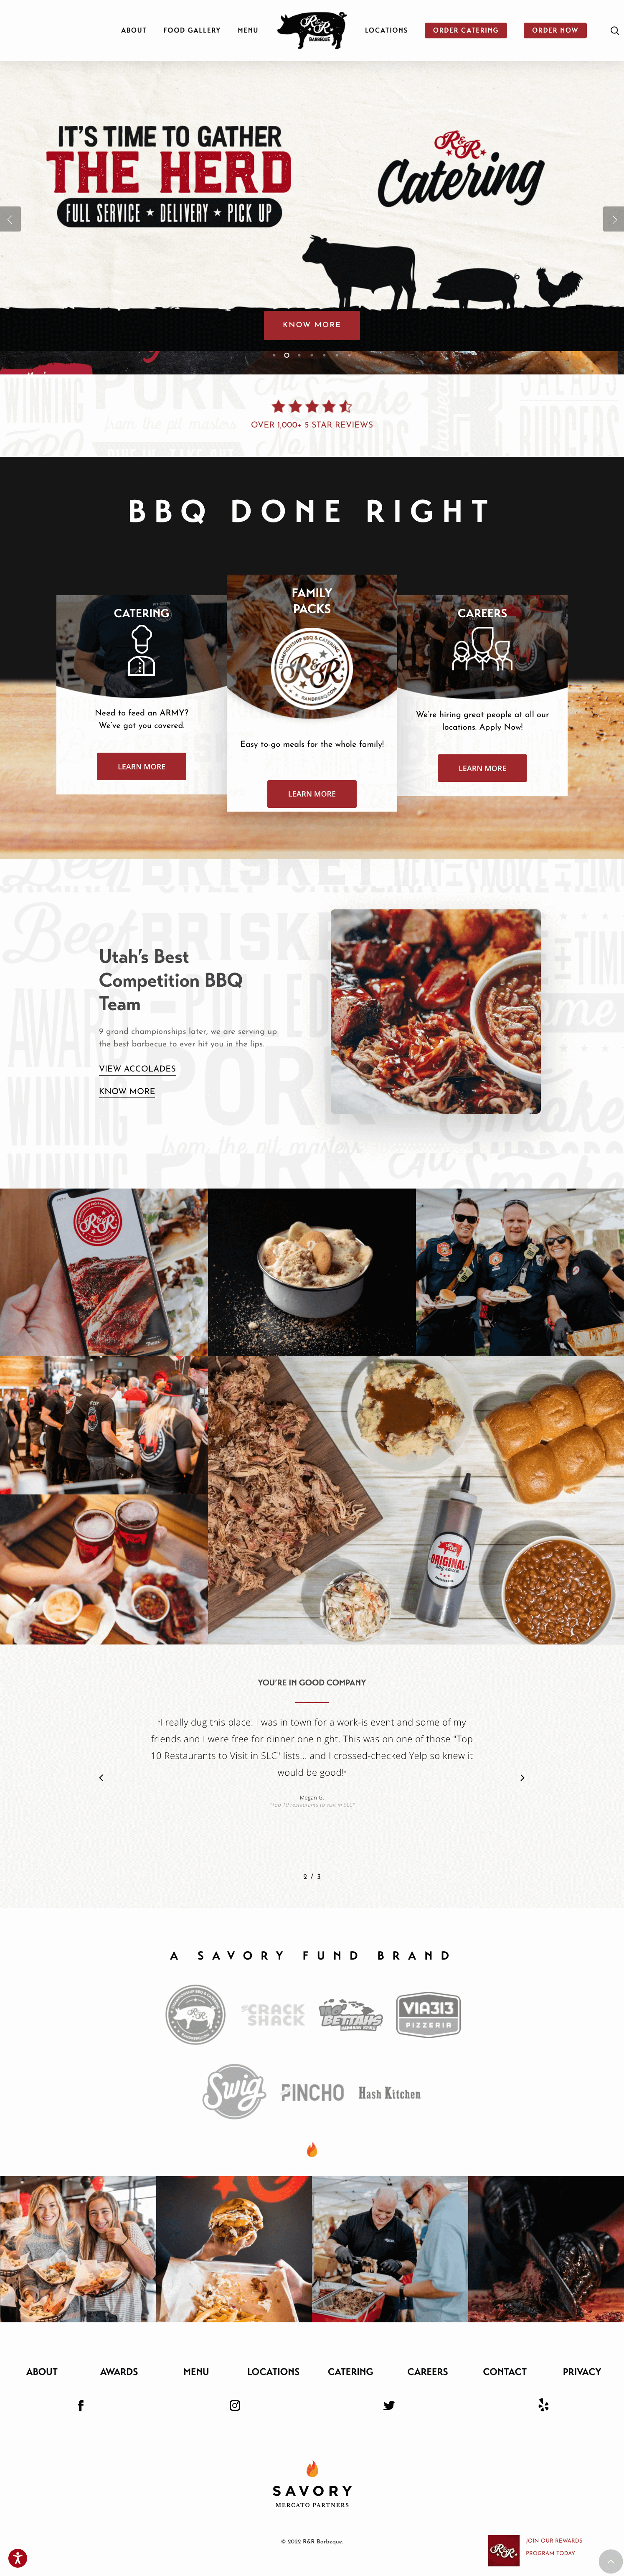 R&R barbeque full website design and optimizations by Big Red Jelly web building